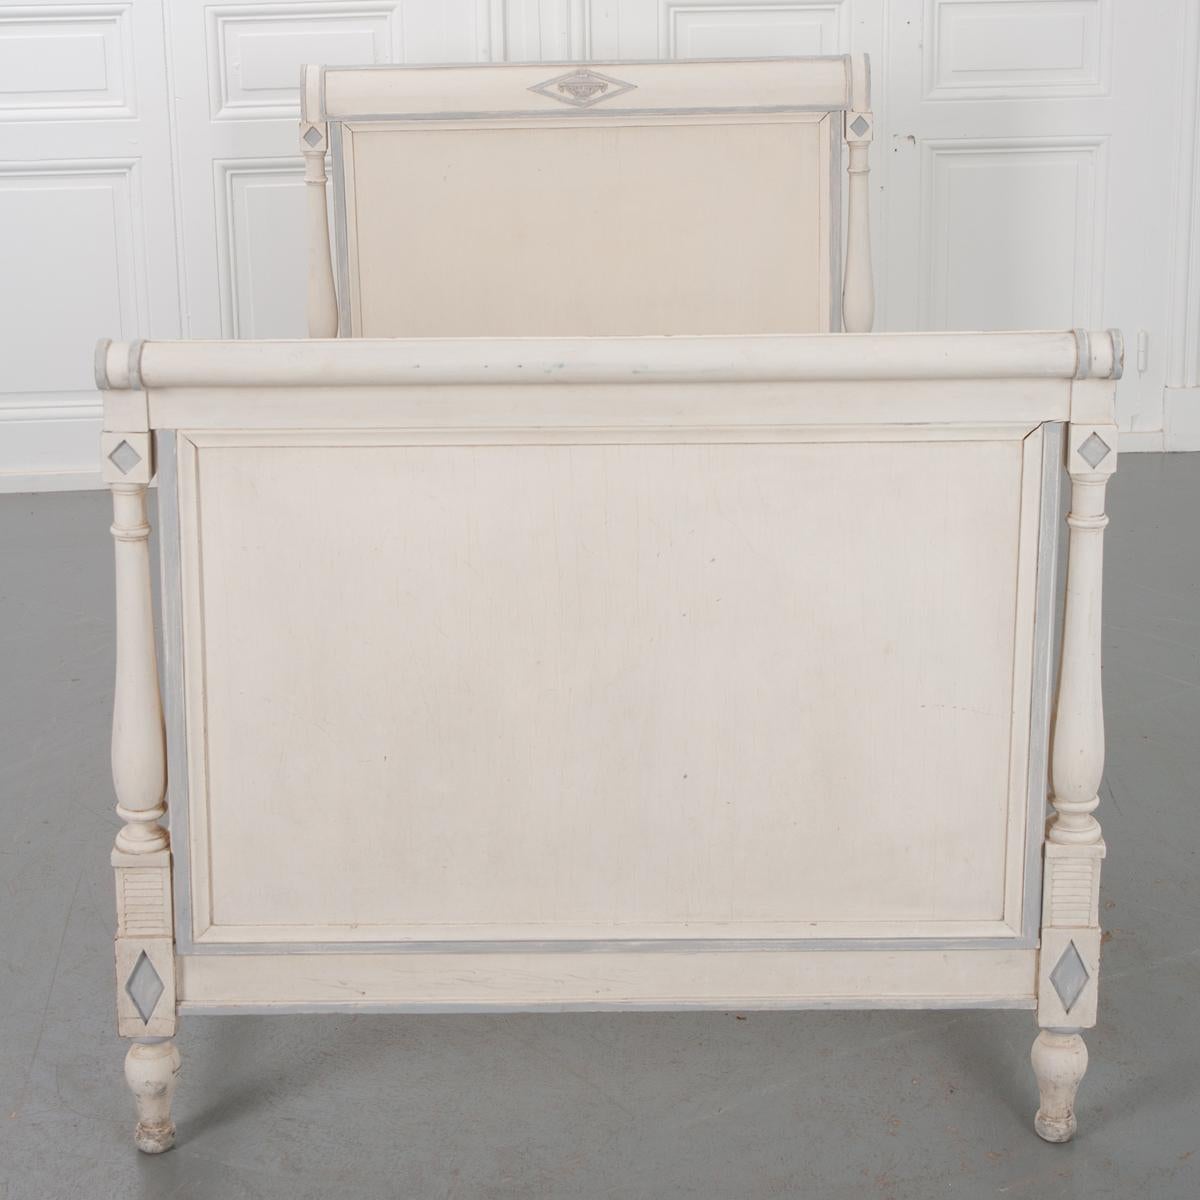 This elegant, 19th century bed is in the Directoire style. It has a pale gray paint with a blue-gray accent highlighting the details. The headboard and footboard have columns on each side and are centered by a hand carved diamond with an urn in it.